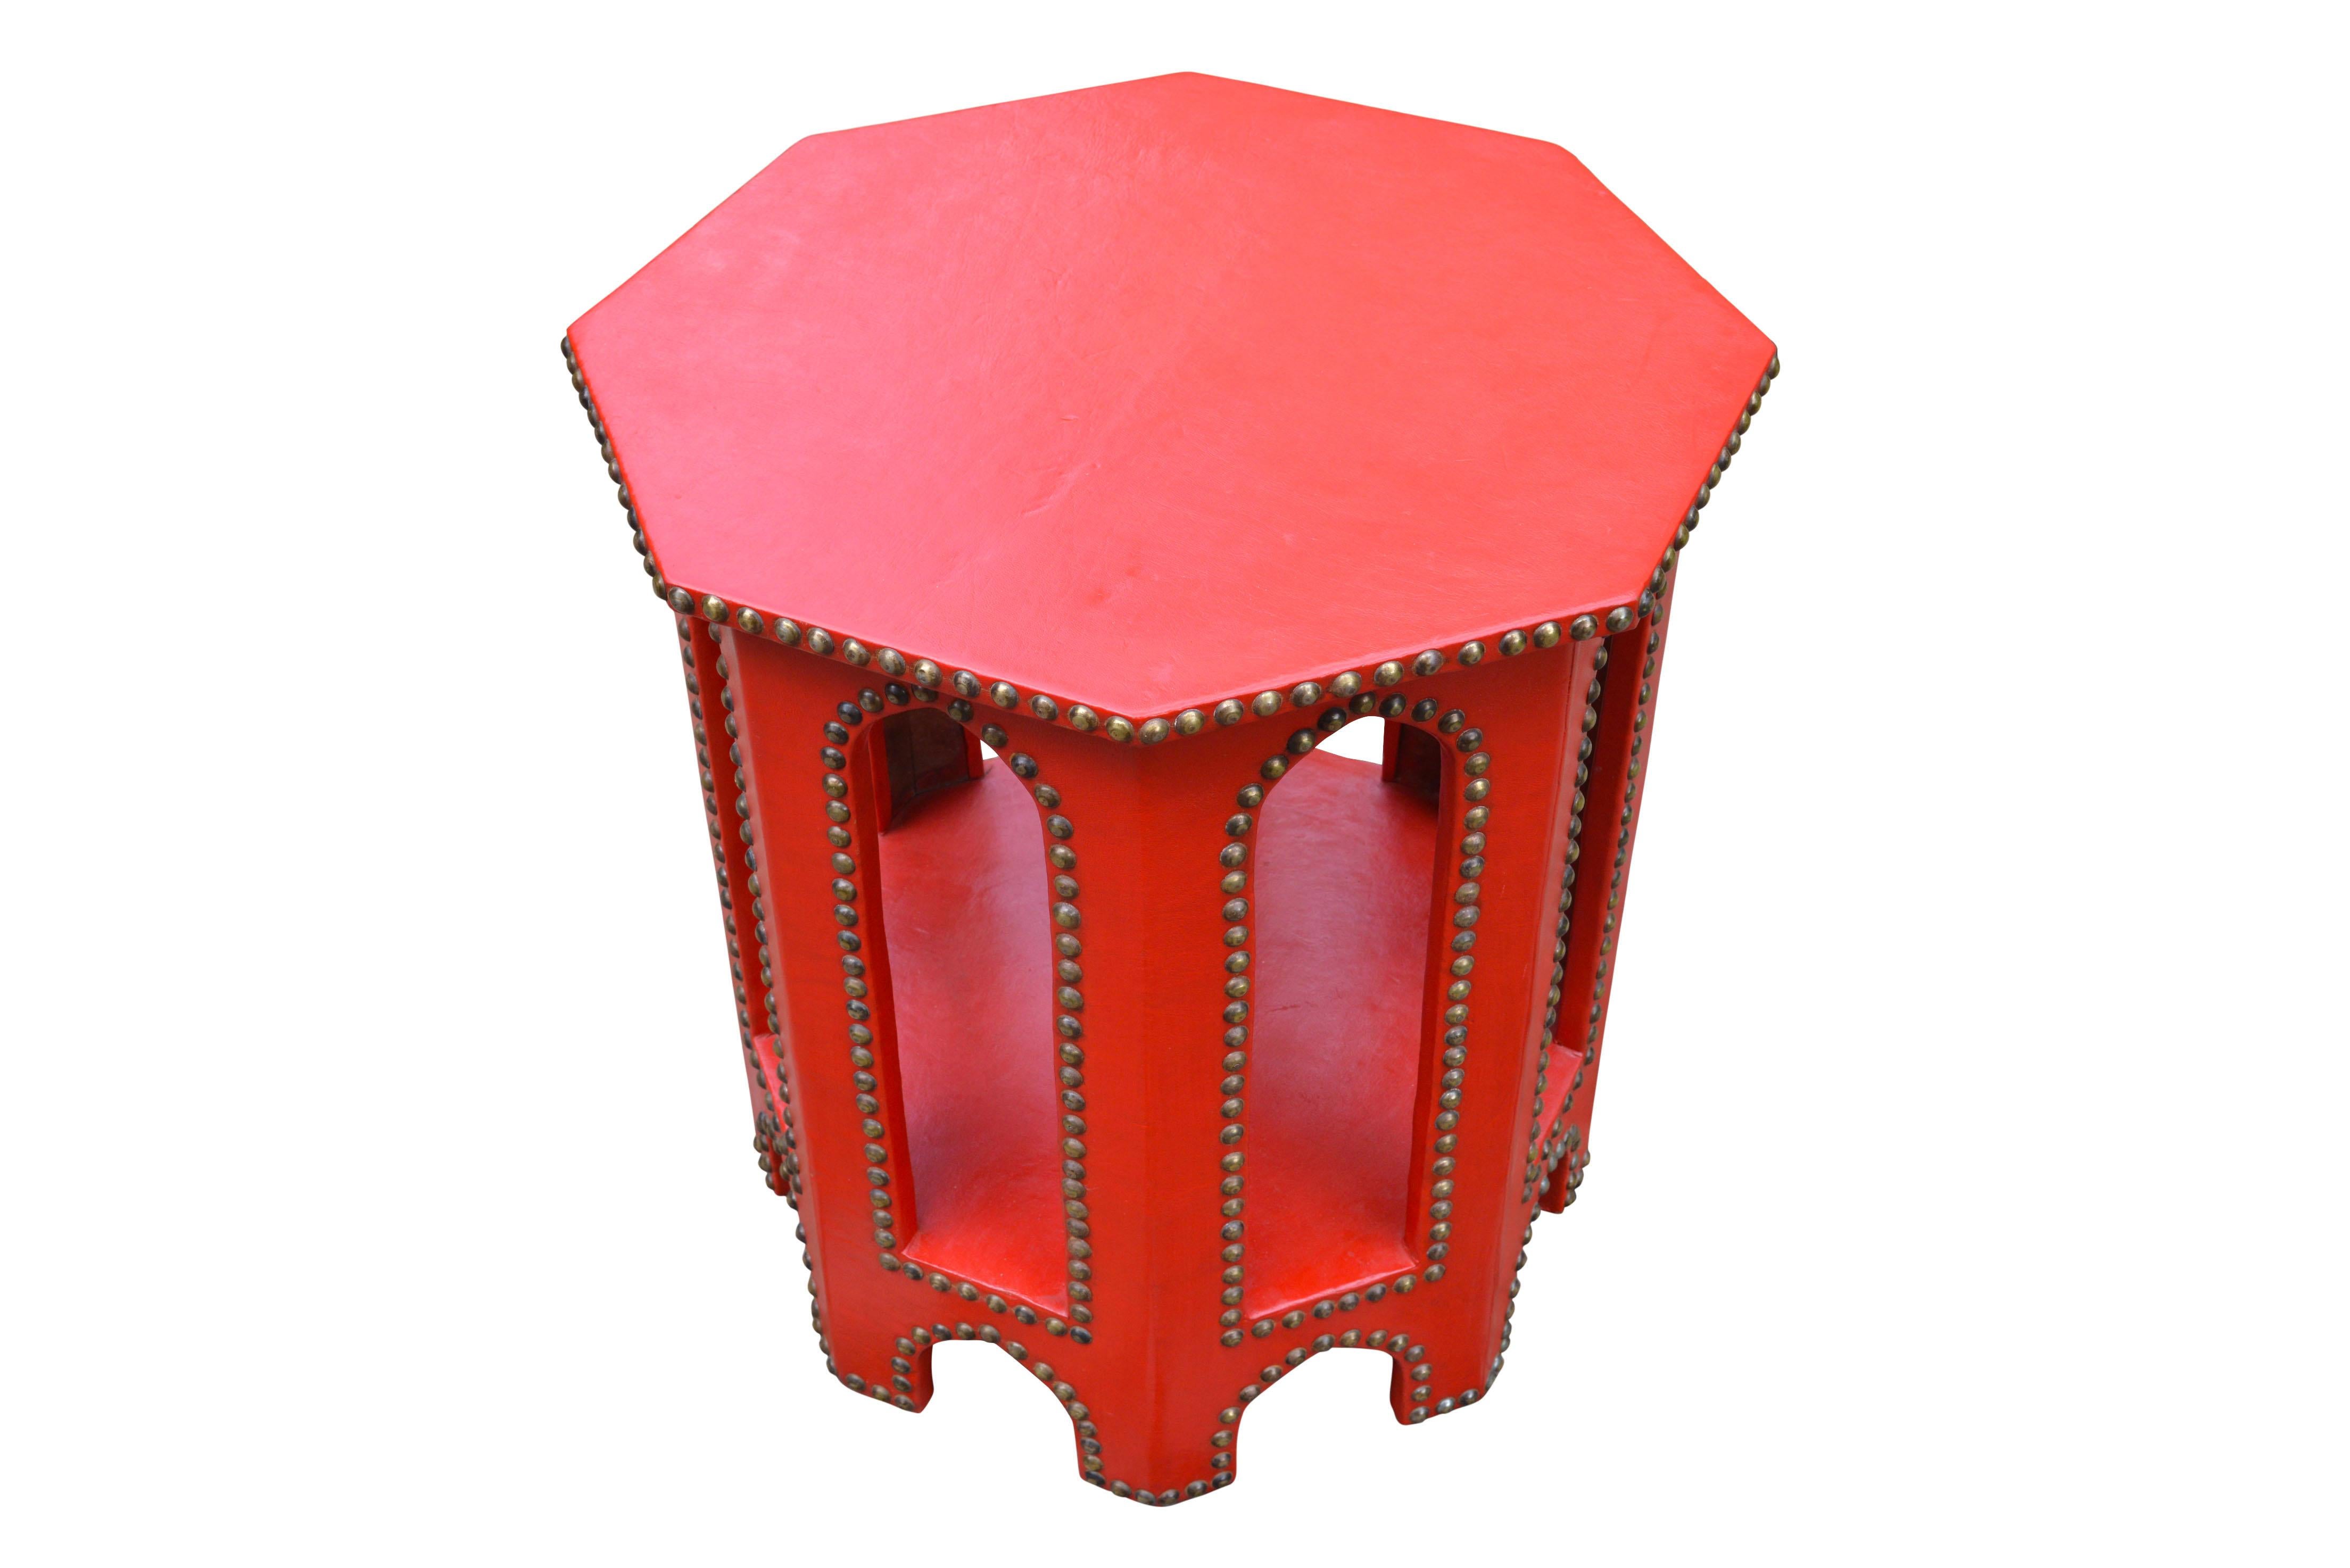 Delightful octagonal tea table in oriental style with characteristic ottoman arches. Covered in red leather with a beautiful patina and brass stud outlining’s.